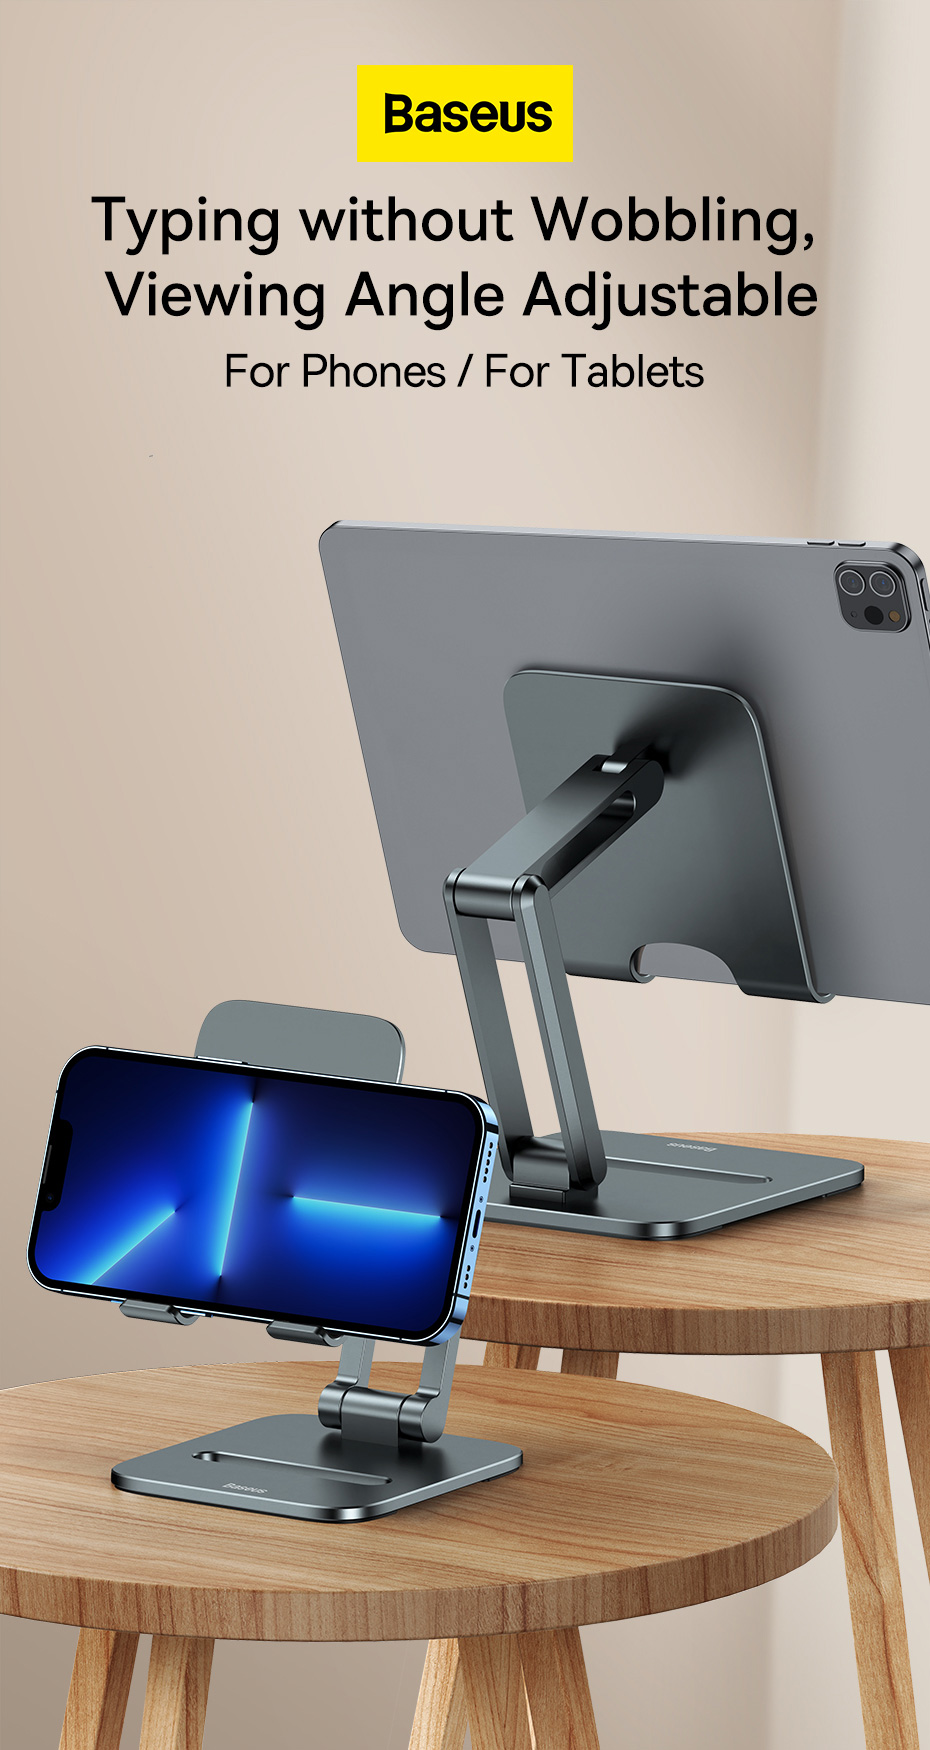 Baseus-Phone-Holder-Desk-Double-Axis-Foldable-Metal-Stand-for-iPad-Pro-Air-Tablet-1975775-1